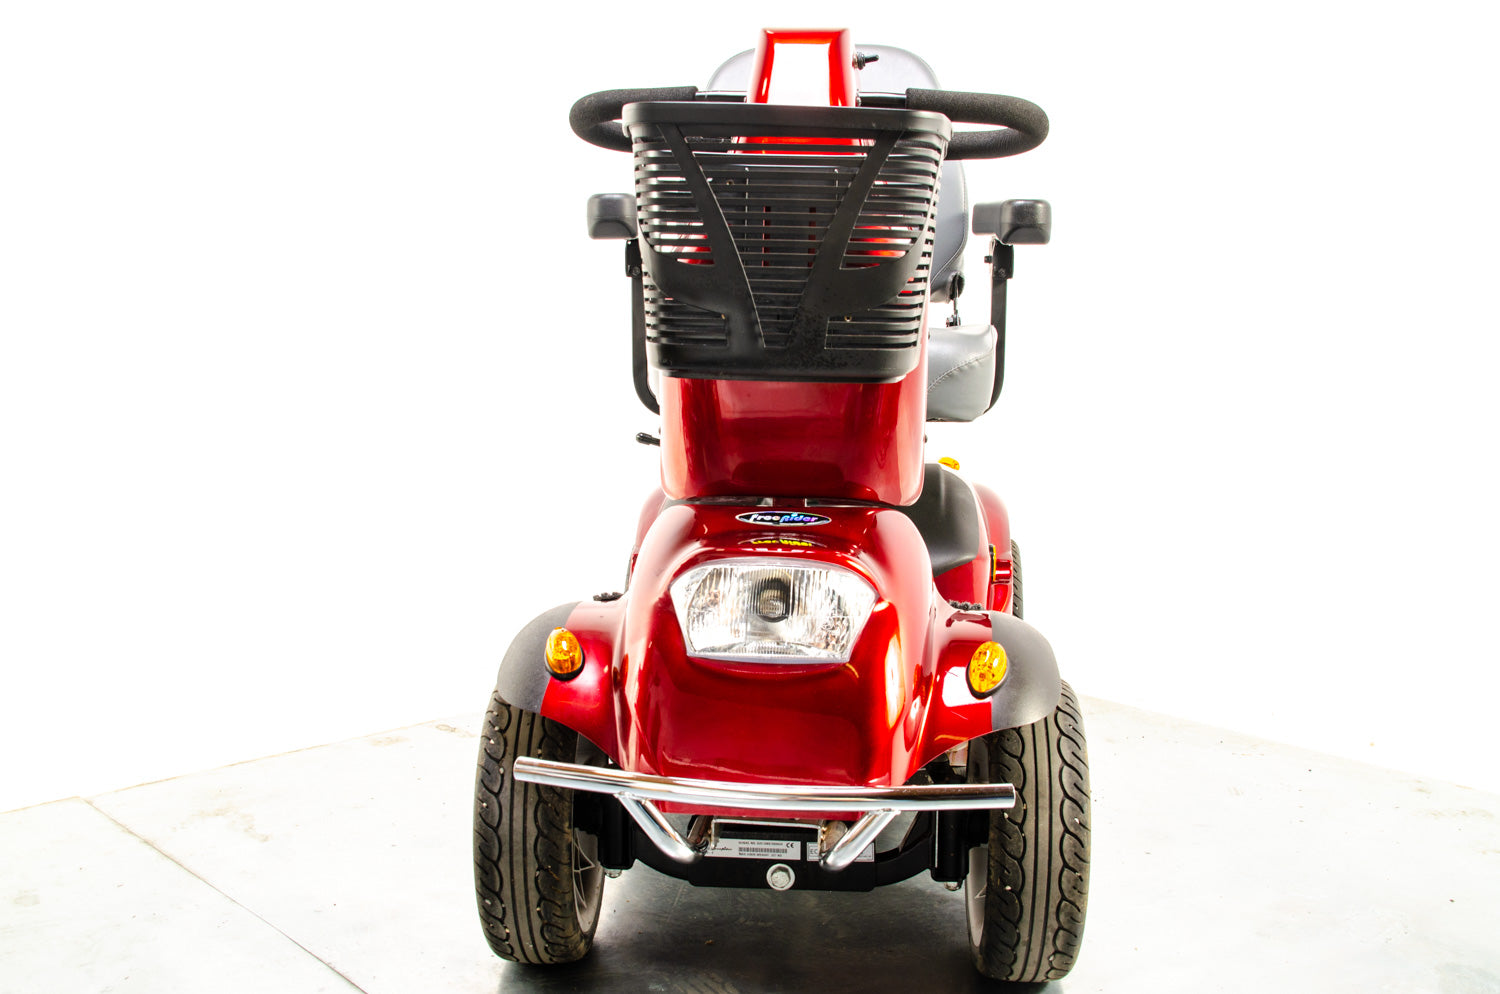 2018 Land Ranger S HD 35 Stone Bariatric Road Scooter 8mph Large All-Terrain Off-Road Mobility Red